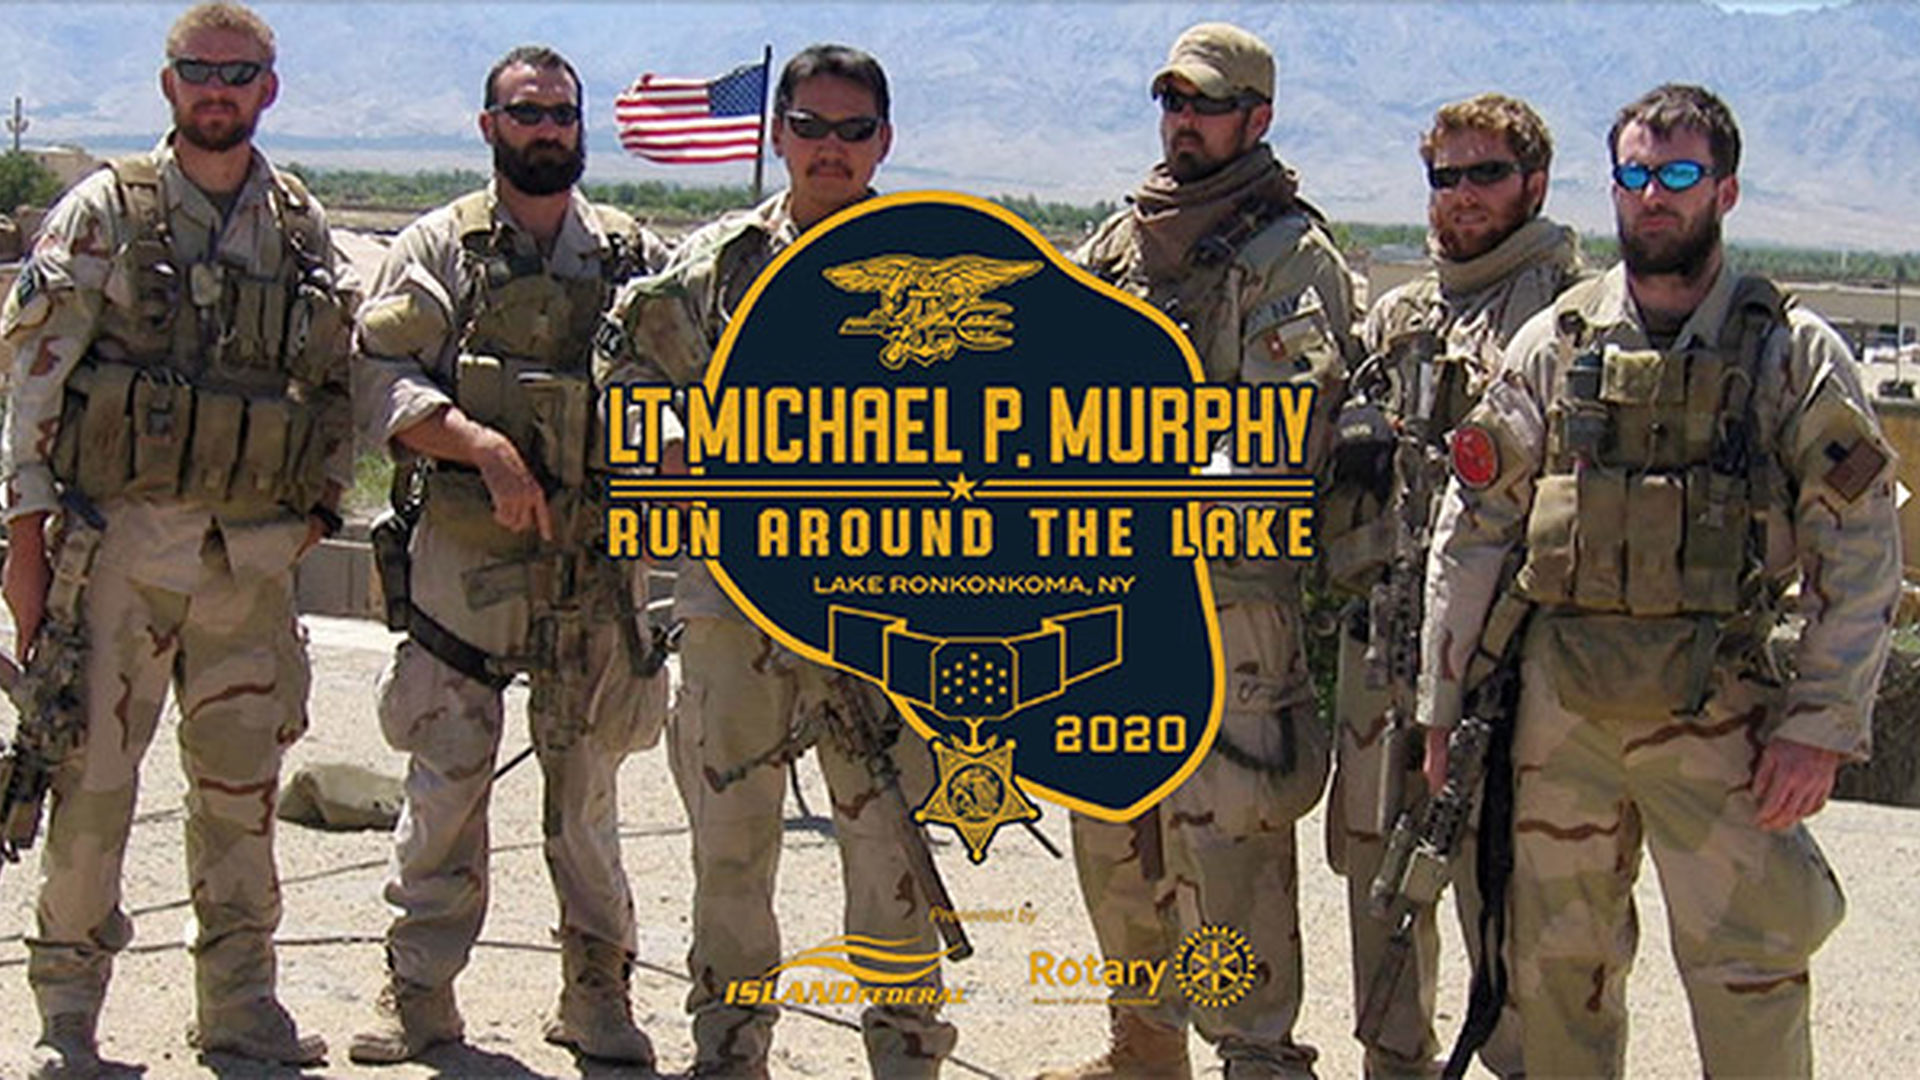 Big Daddy's Celebrity Golf Challenge: A Tribute To Lt. Michael P. Murphy